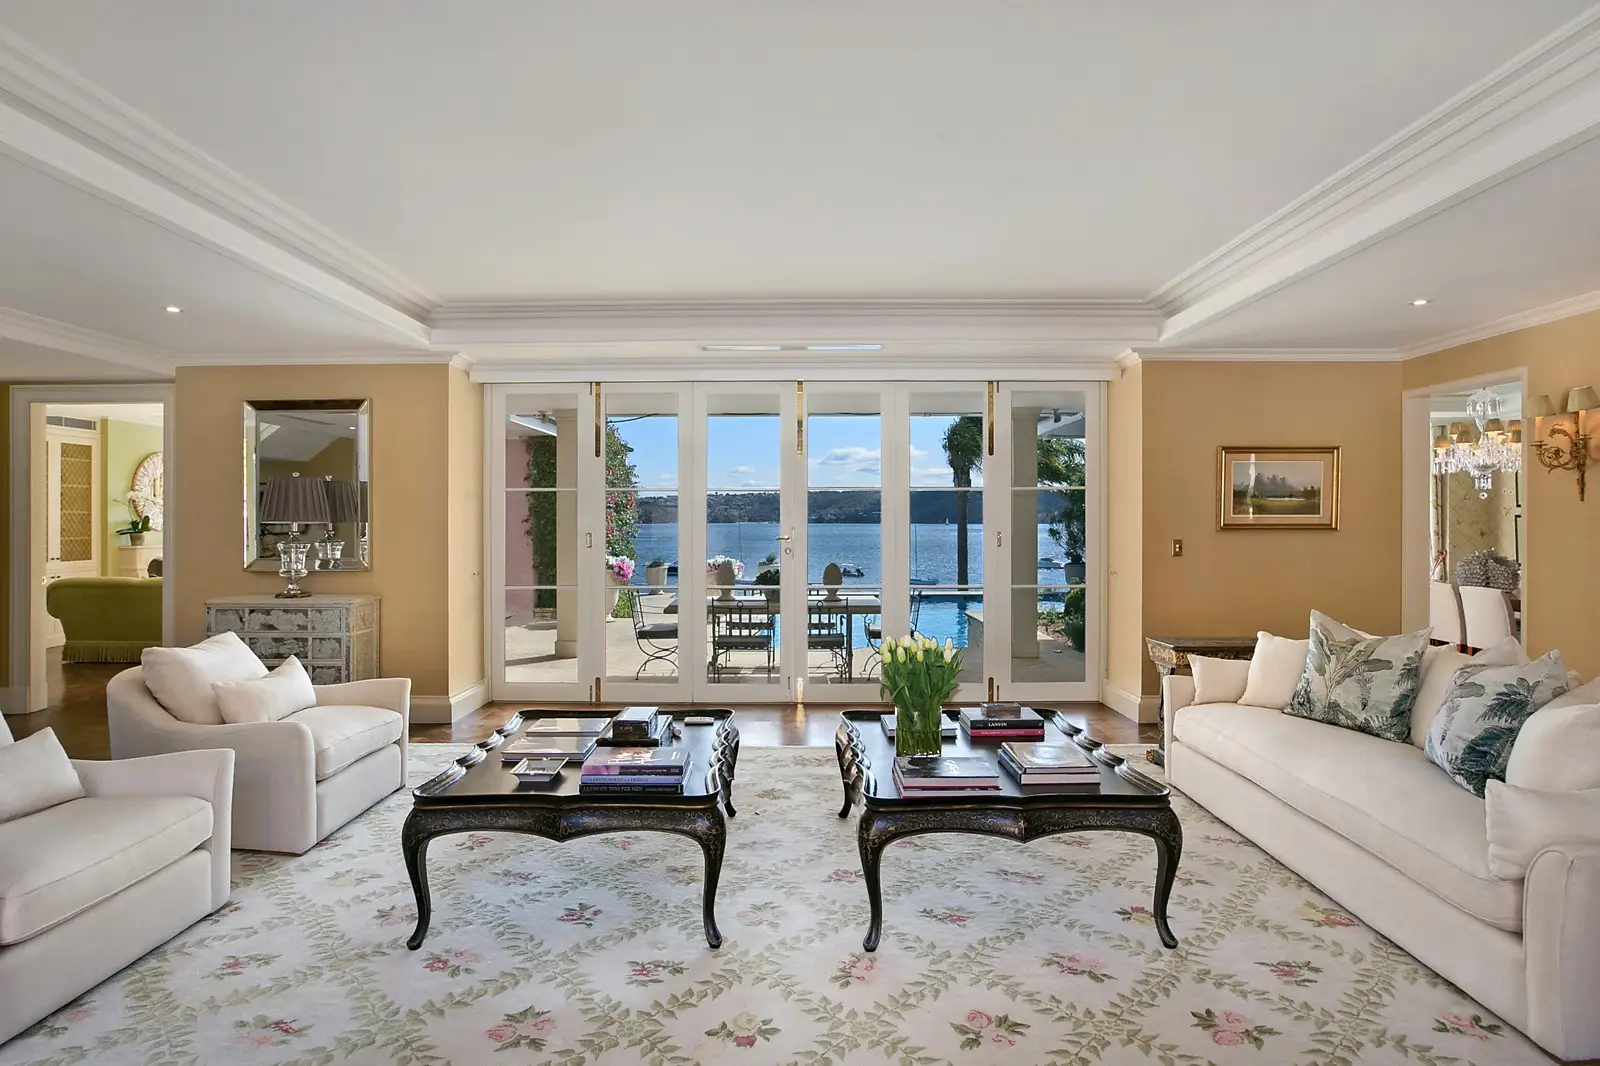 Photo #3: 34 The Crescent, Vaucluse - Sold by Sydney Sotheby's International Realty